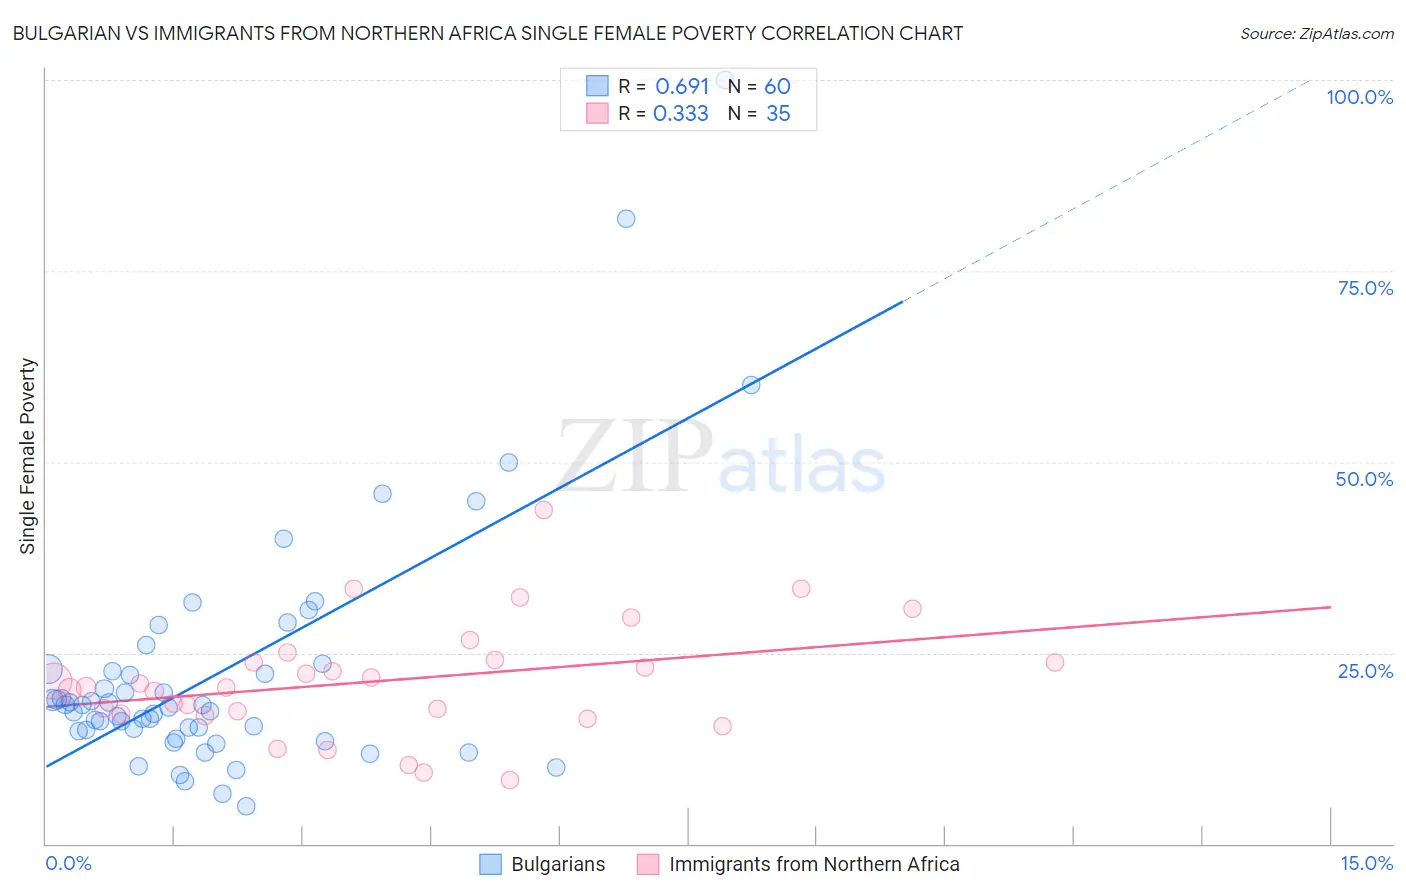 Bulgarian vs Immigrants from Northern Africa Single Female Poverty